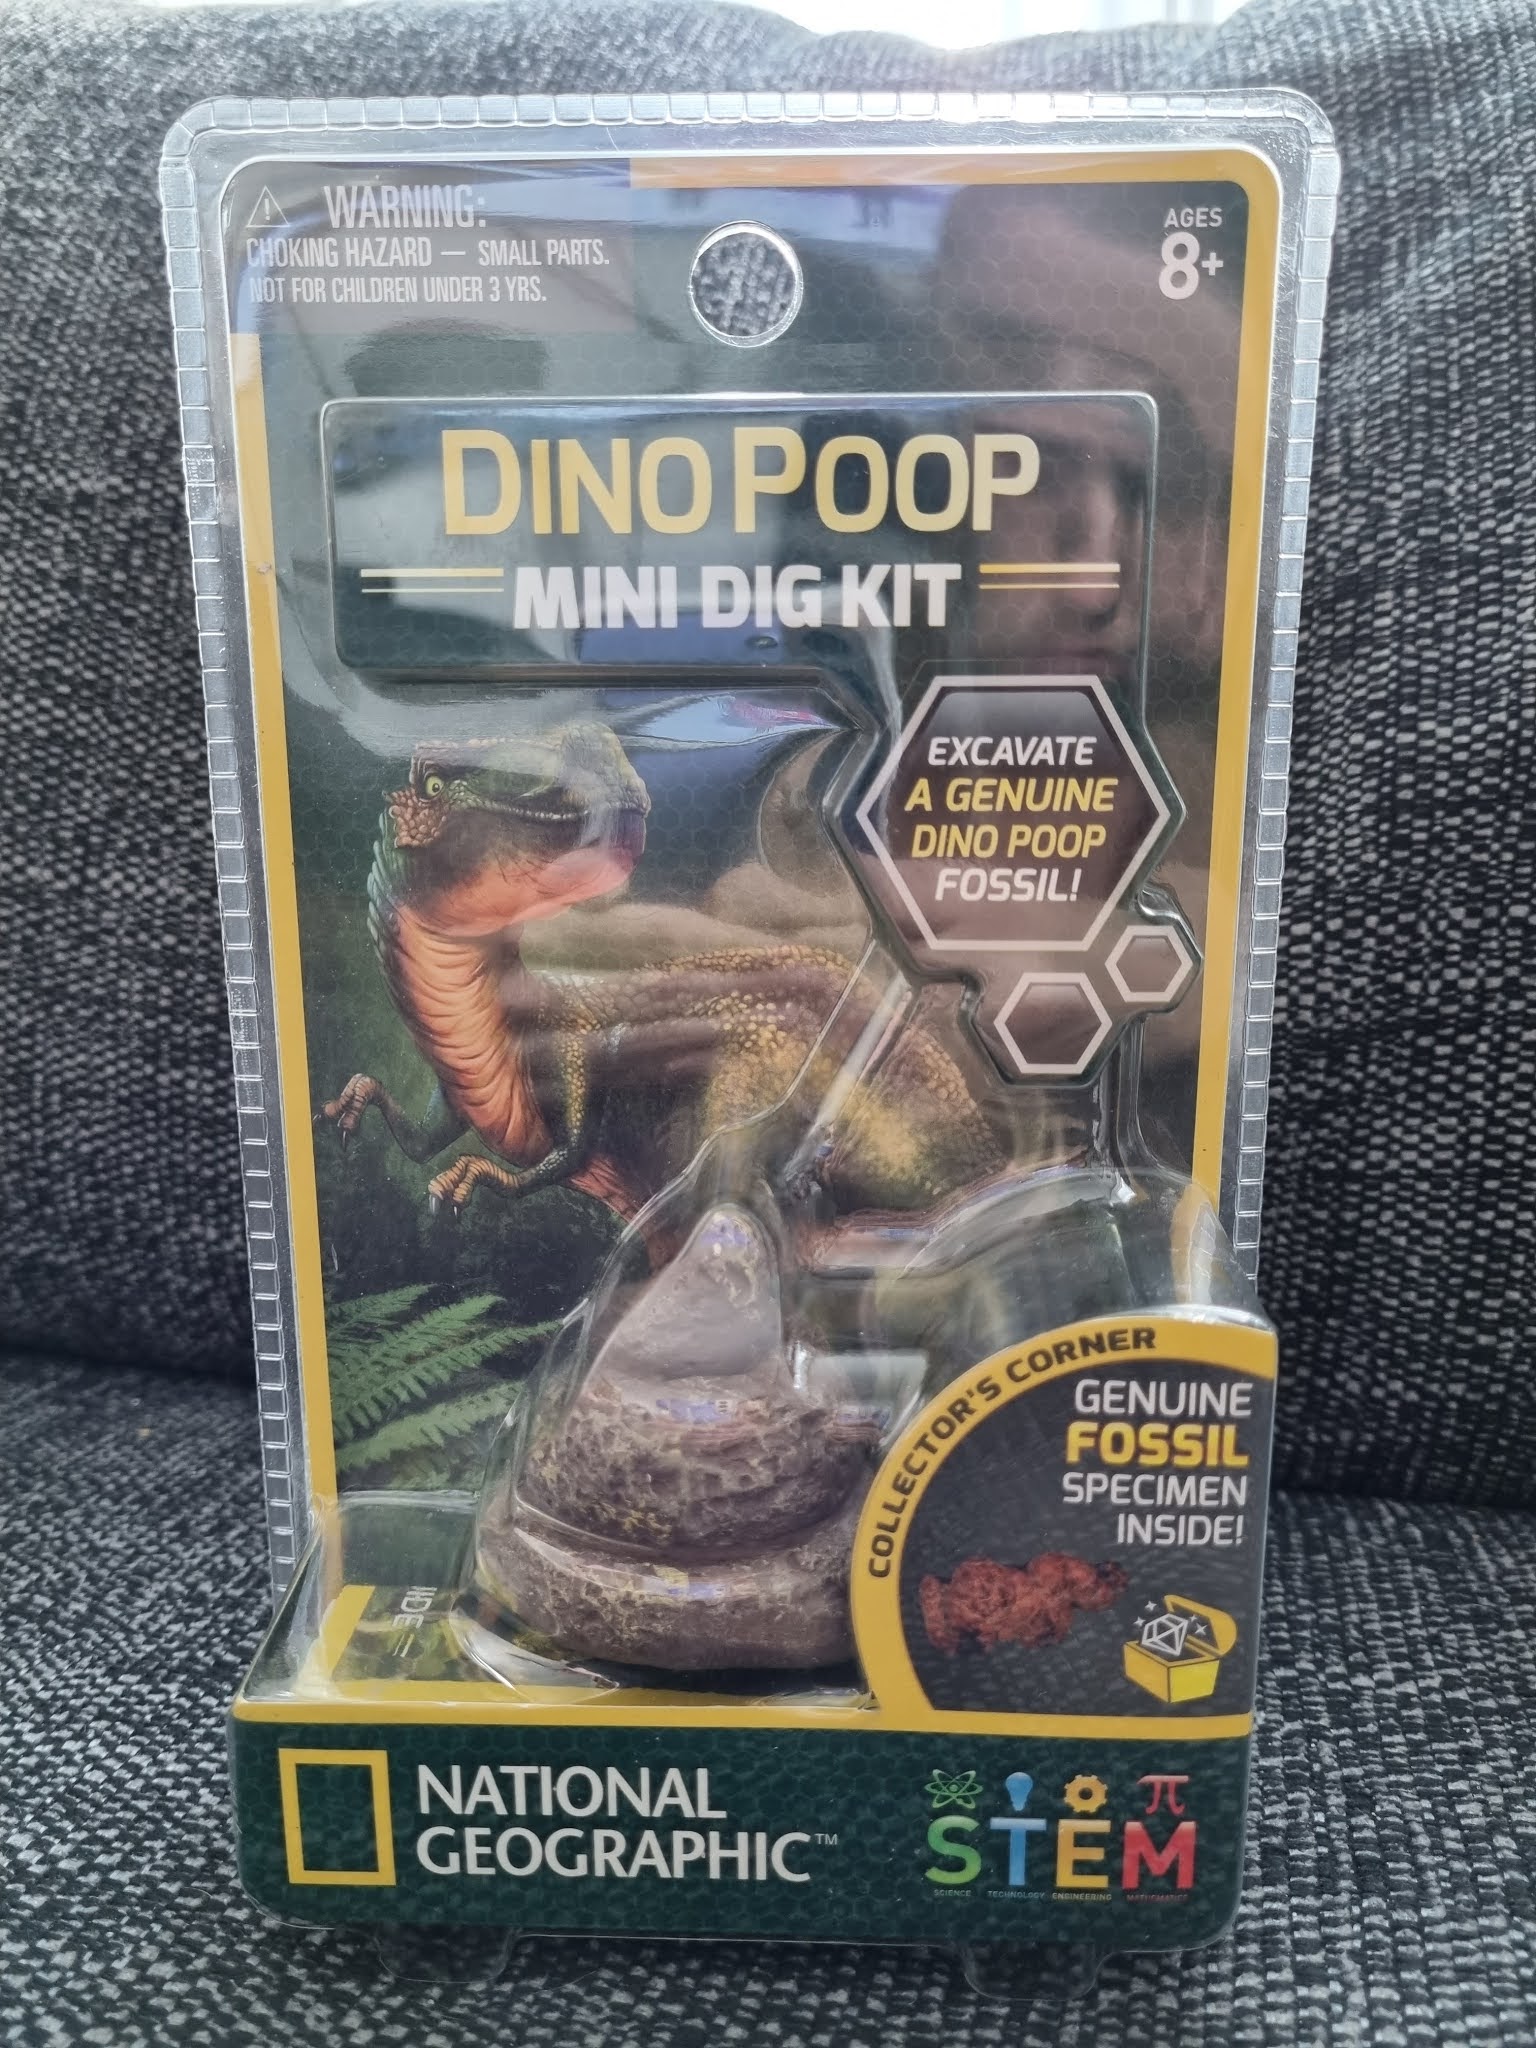 The Brick Castle: National Geographic Mini Dig Kits STEM Toy Review Age 8+  (Sent by Bandai)